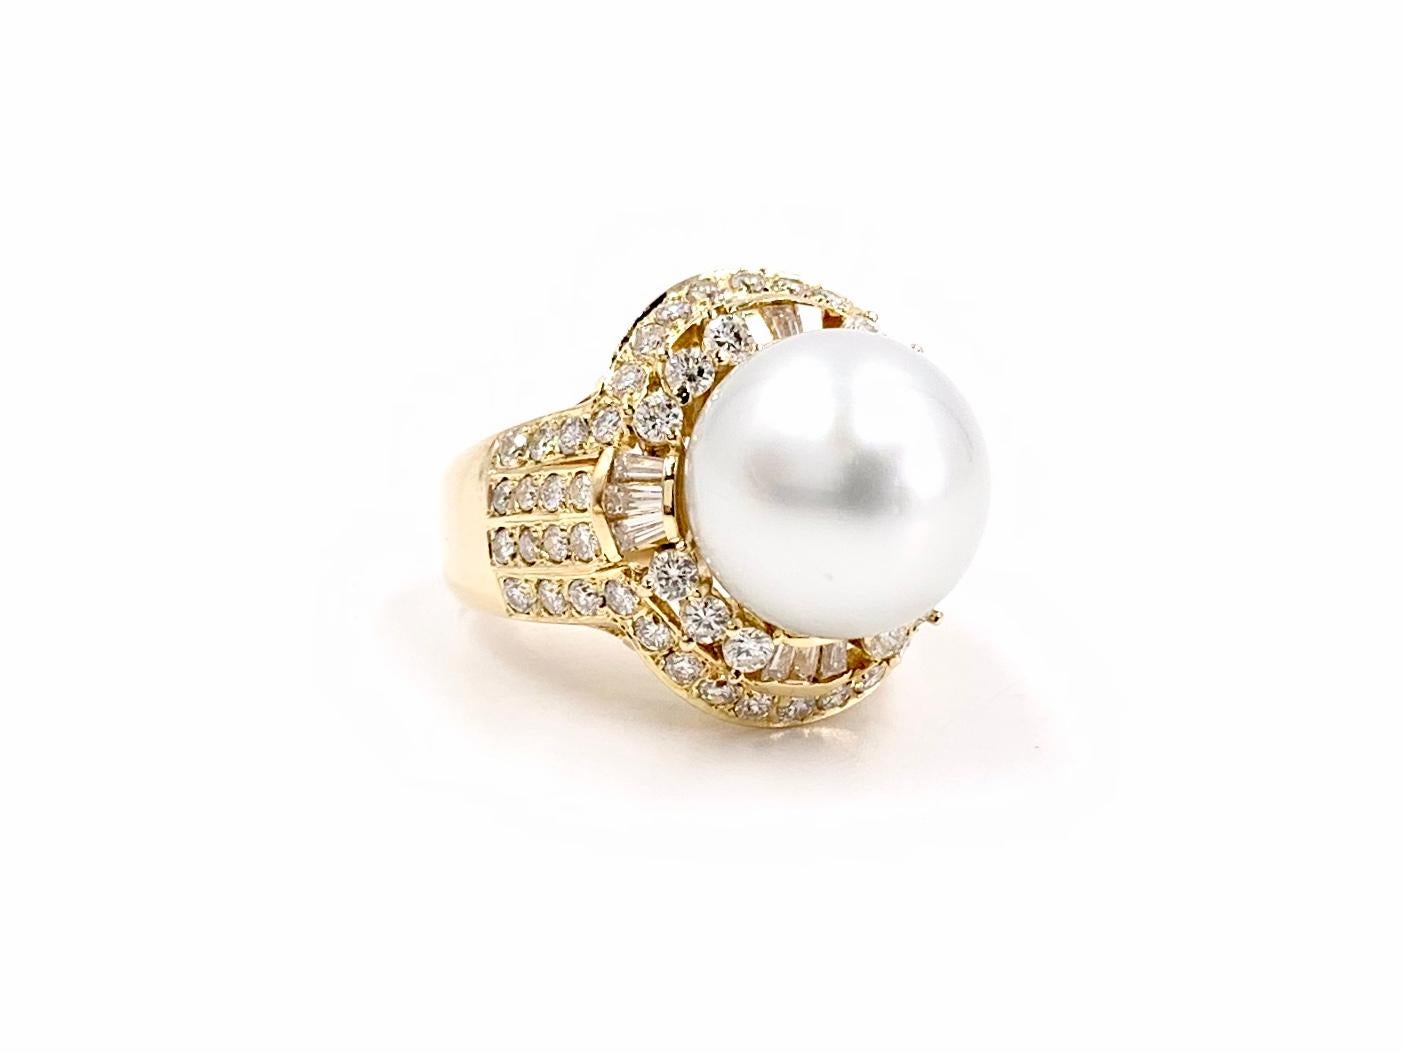 A beautiful and substantial polished 18 karat yellow gold genuine South Sea pearl and diamond cocktail ring. Ring features a 12mm lustrous white South Sea pearl center surrounded by round brilliant and baguette diamonds, arranged in an elegant and